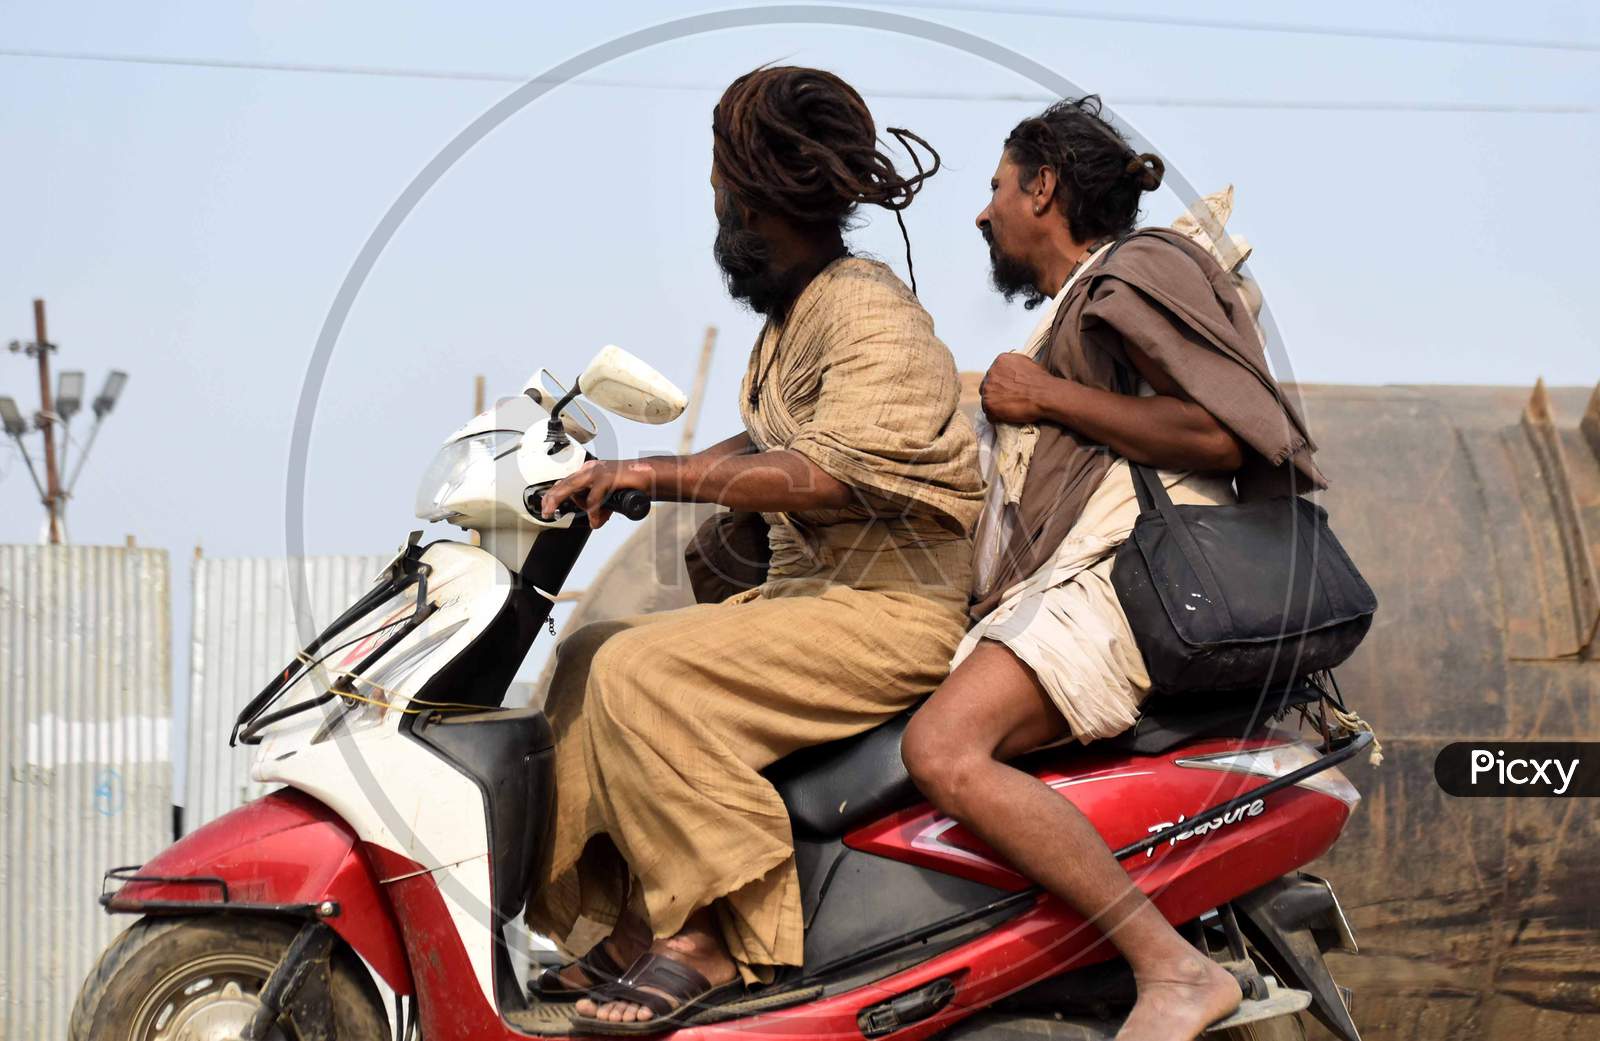 Indian Priests Or Sadhu Driving a Scooty